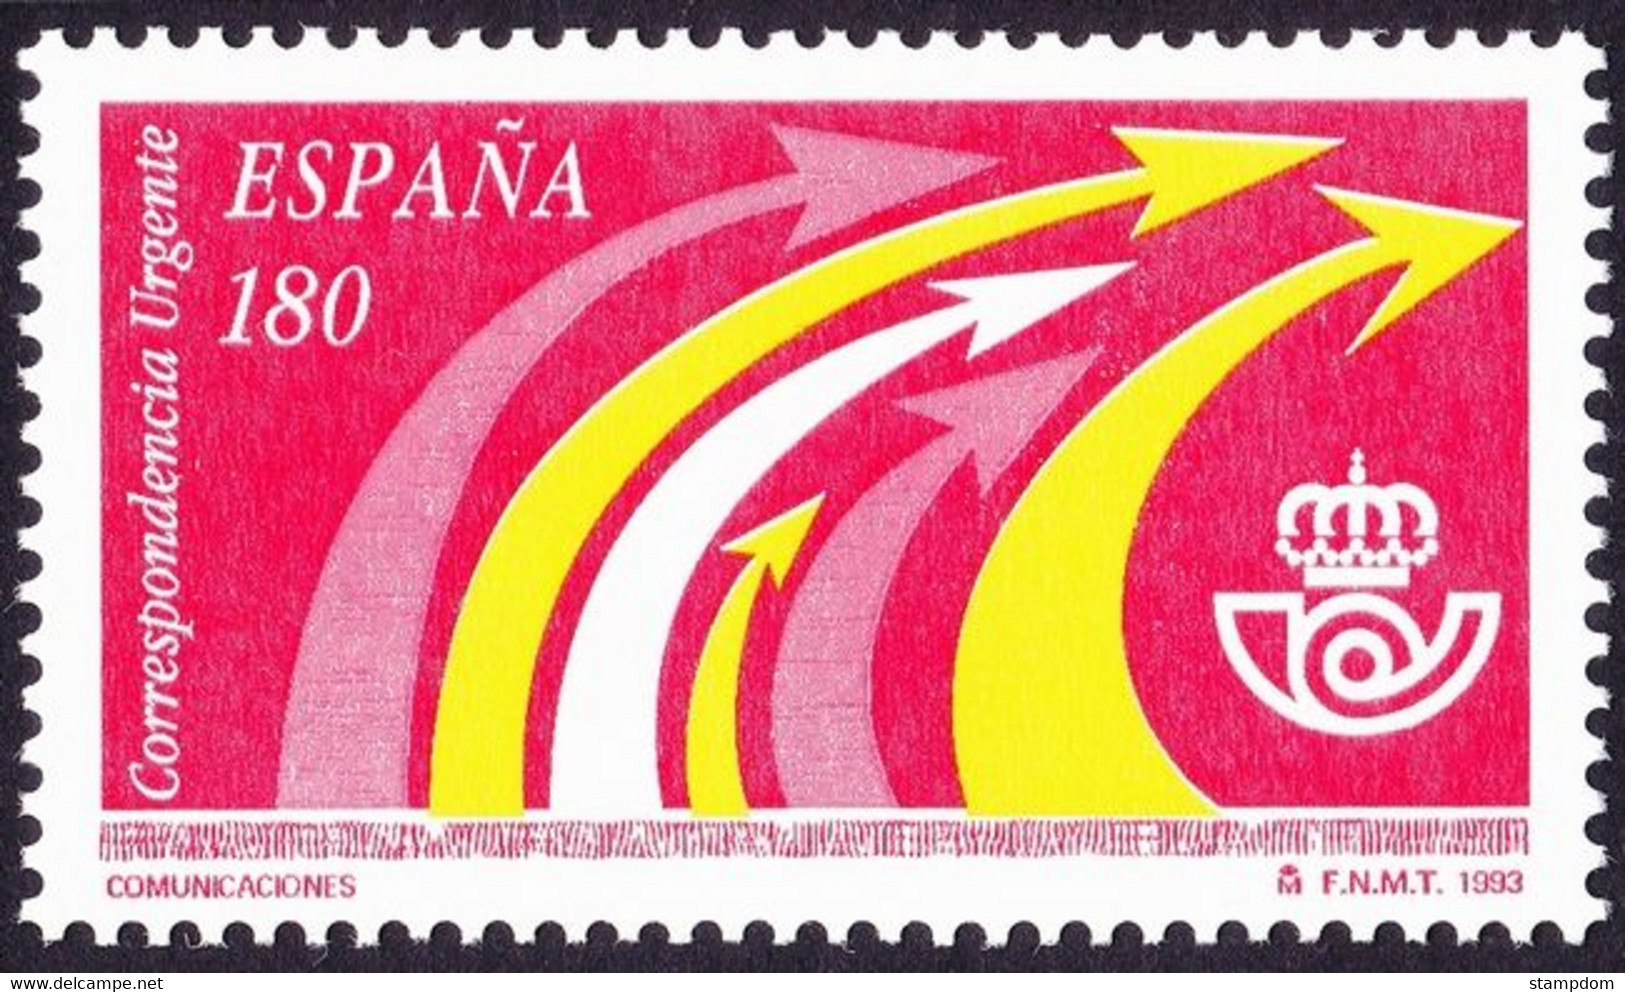 SPAIN 1993 Special Delivery Sc#E28 MNH @S4502 - Exprès